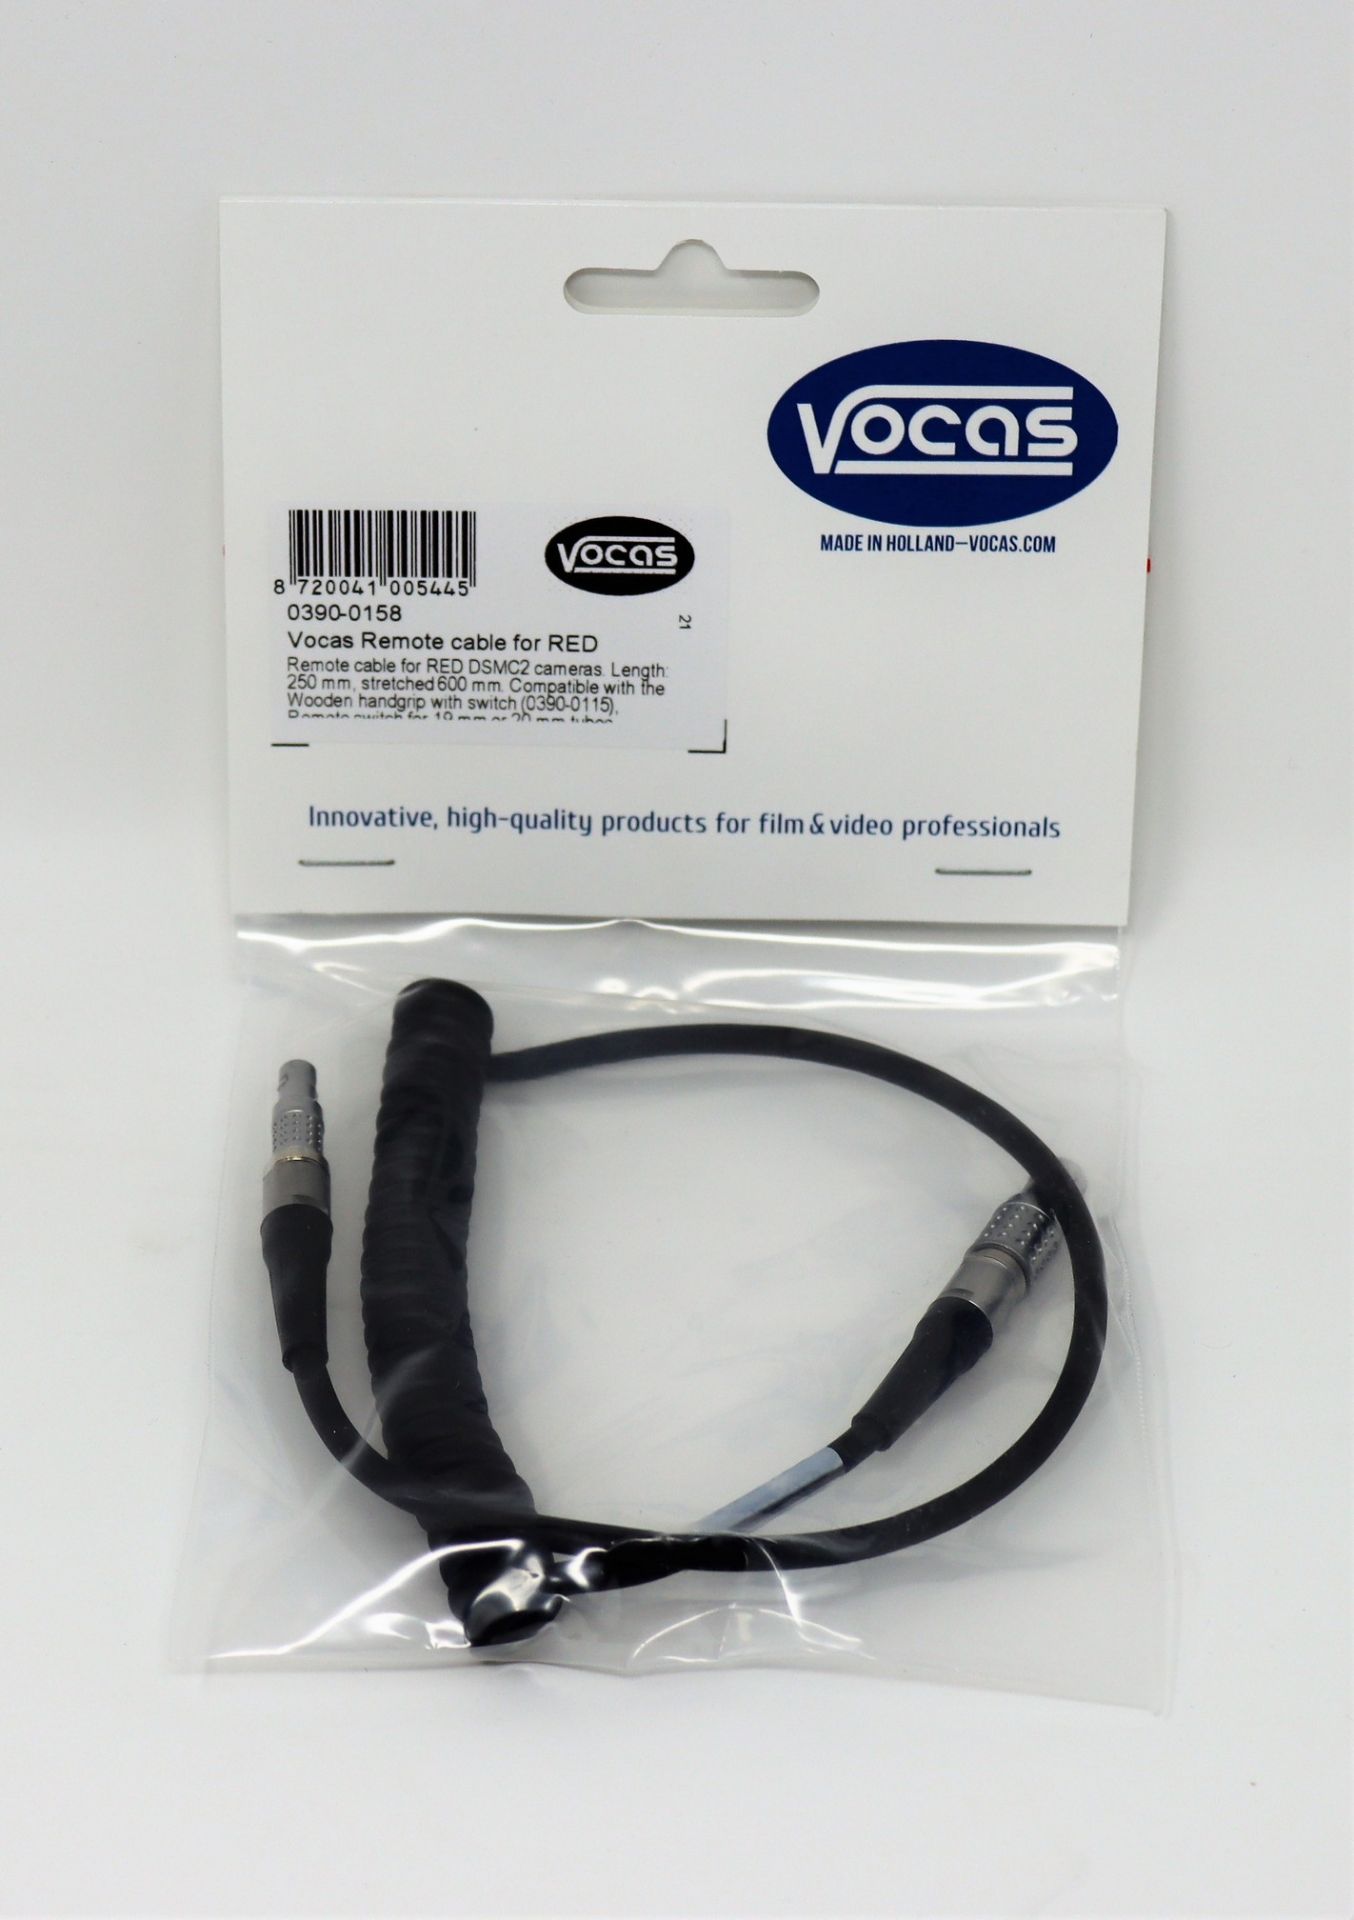 Four as new Vocas Remote Cables for RED DSMC2 Cameras (Length: 250 mm, stretched 600 mm) (P/N: